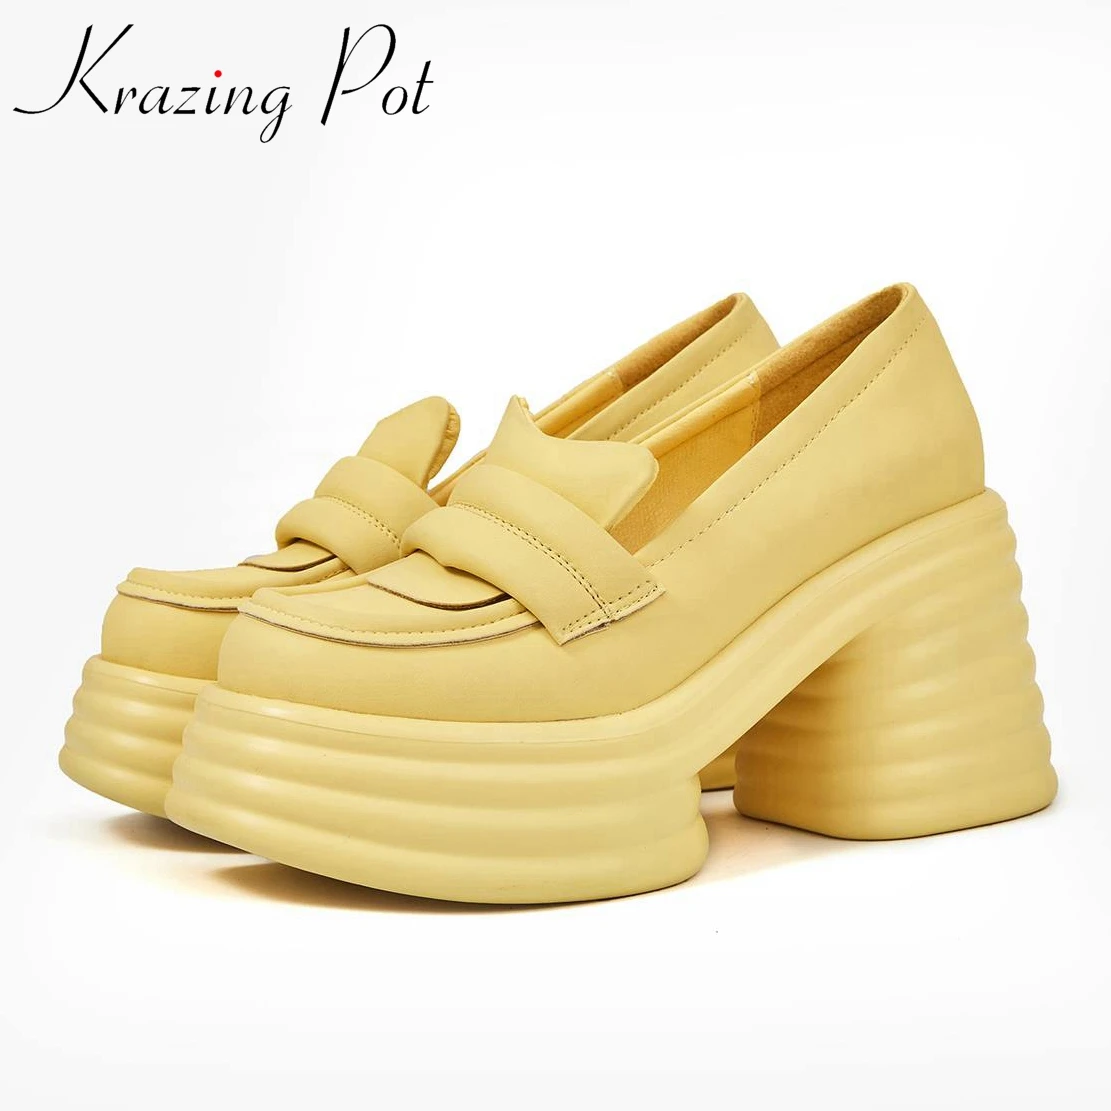 

Krazing Pot Cow Leather Round Toe Thick High Heels Platform Spring Shoes Basic Simple Style Solid Causal Slip on Maiden Pumps